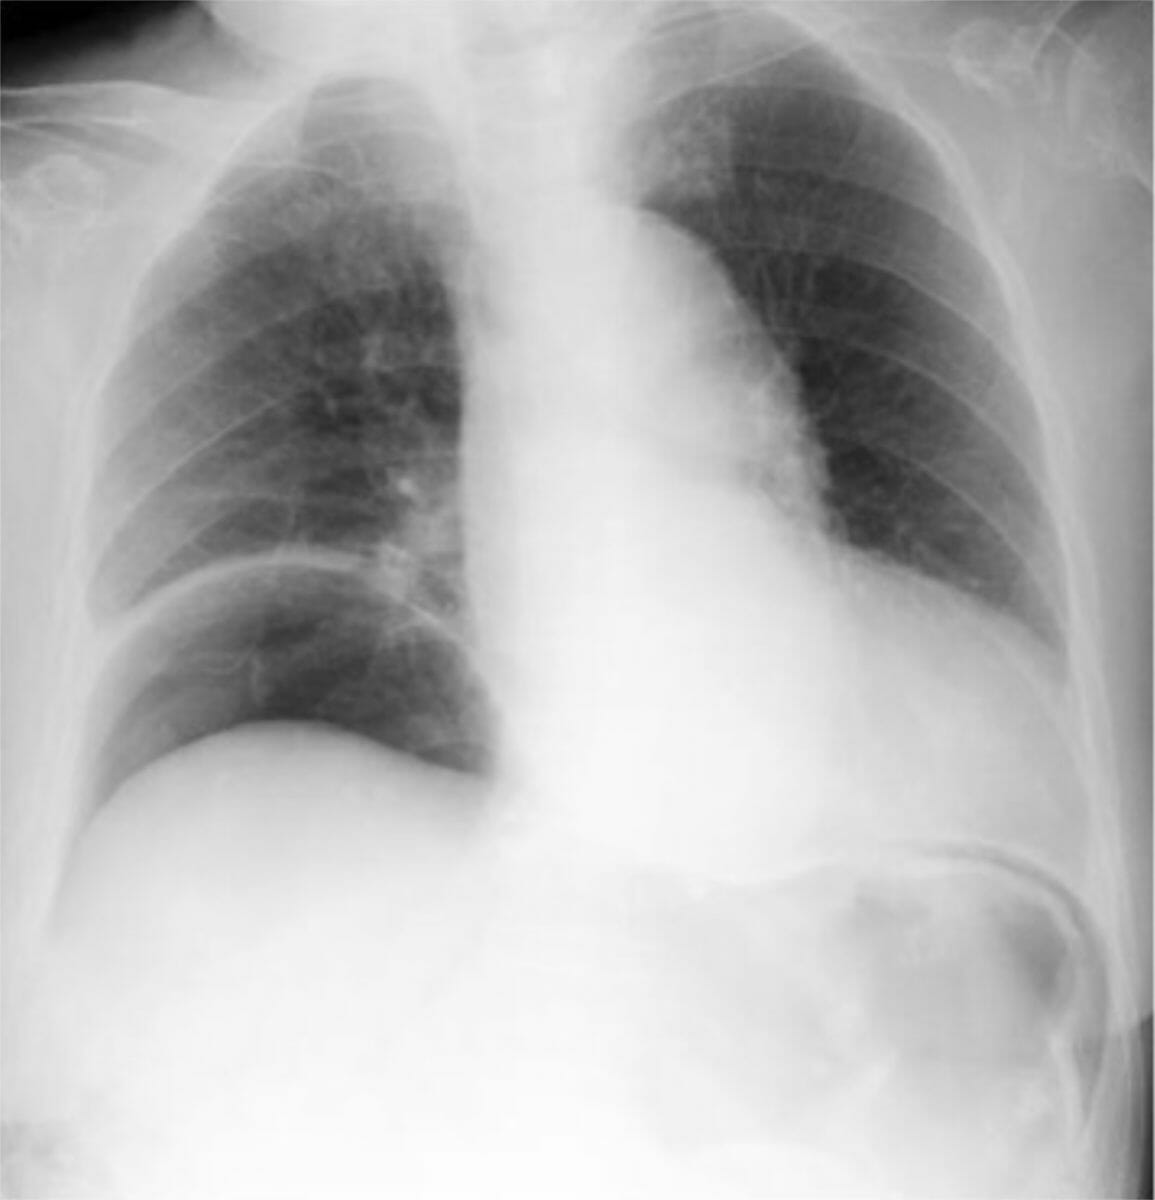 Chest radiograph in the sitting posture showing free gas